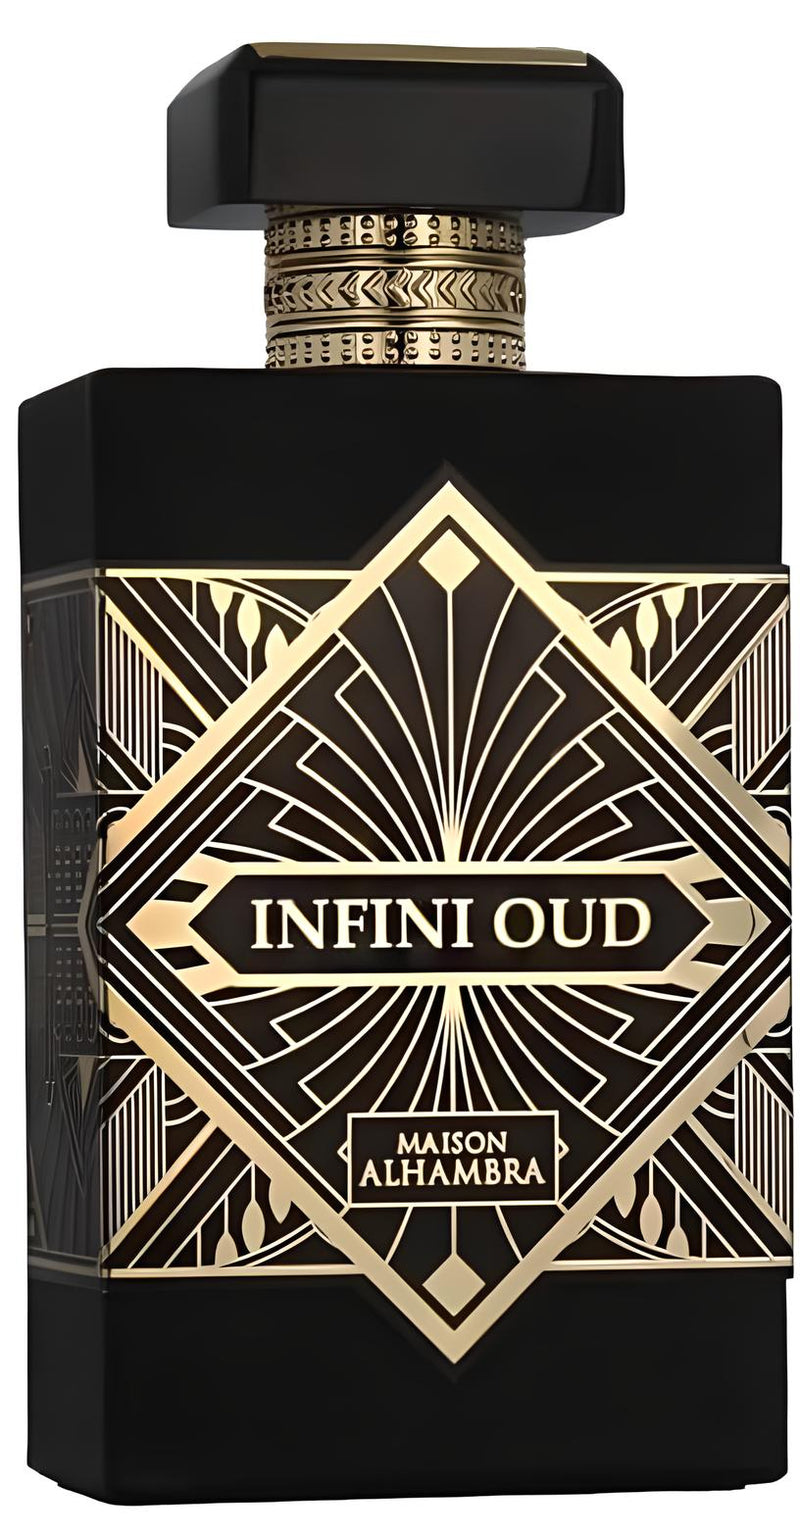 INFINI OUD - OUD FOR GREATNESS